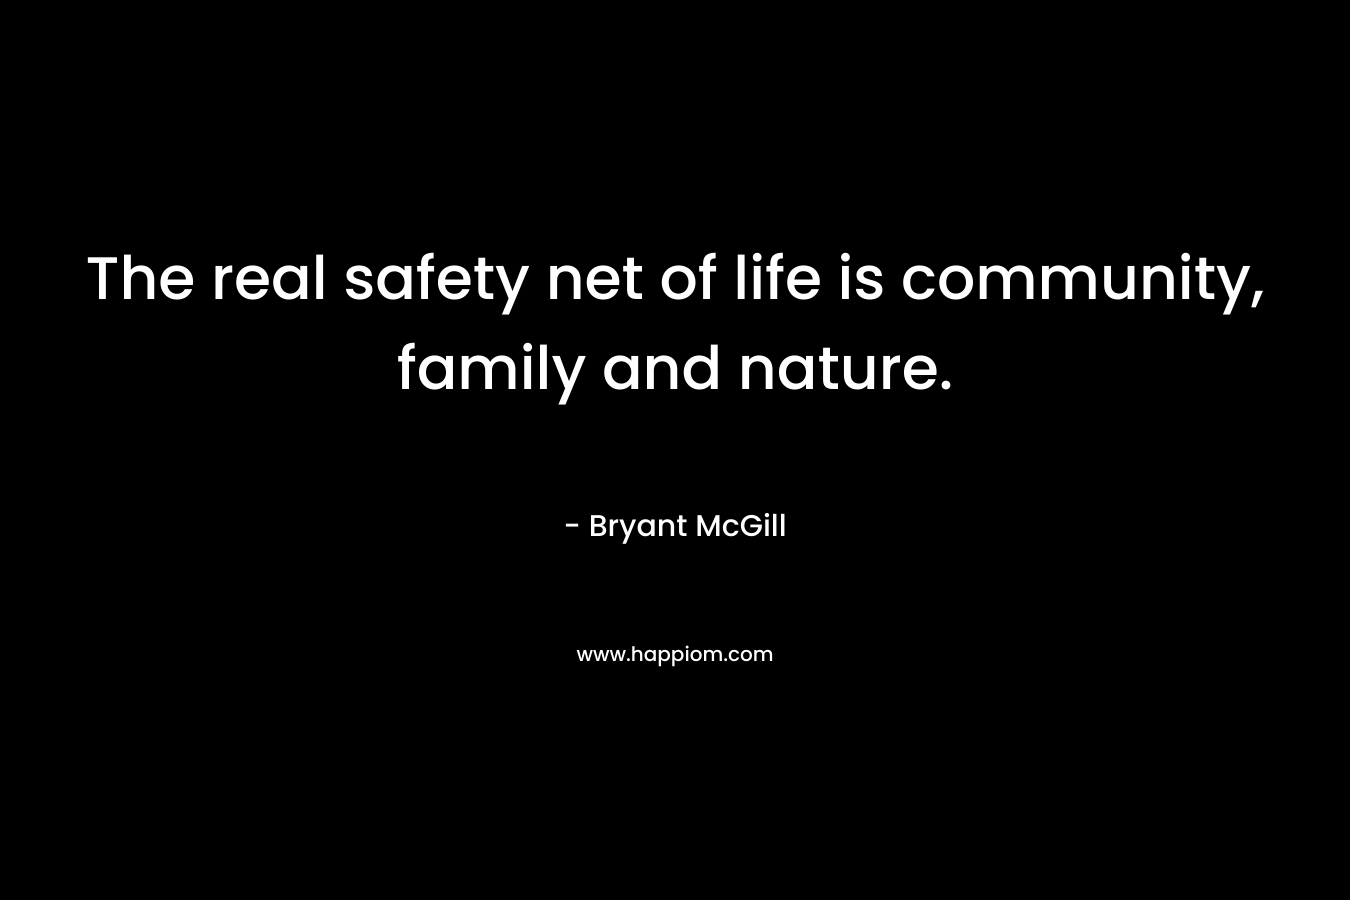 The real safety net of life is community, family and nature.